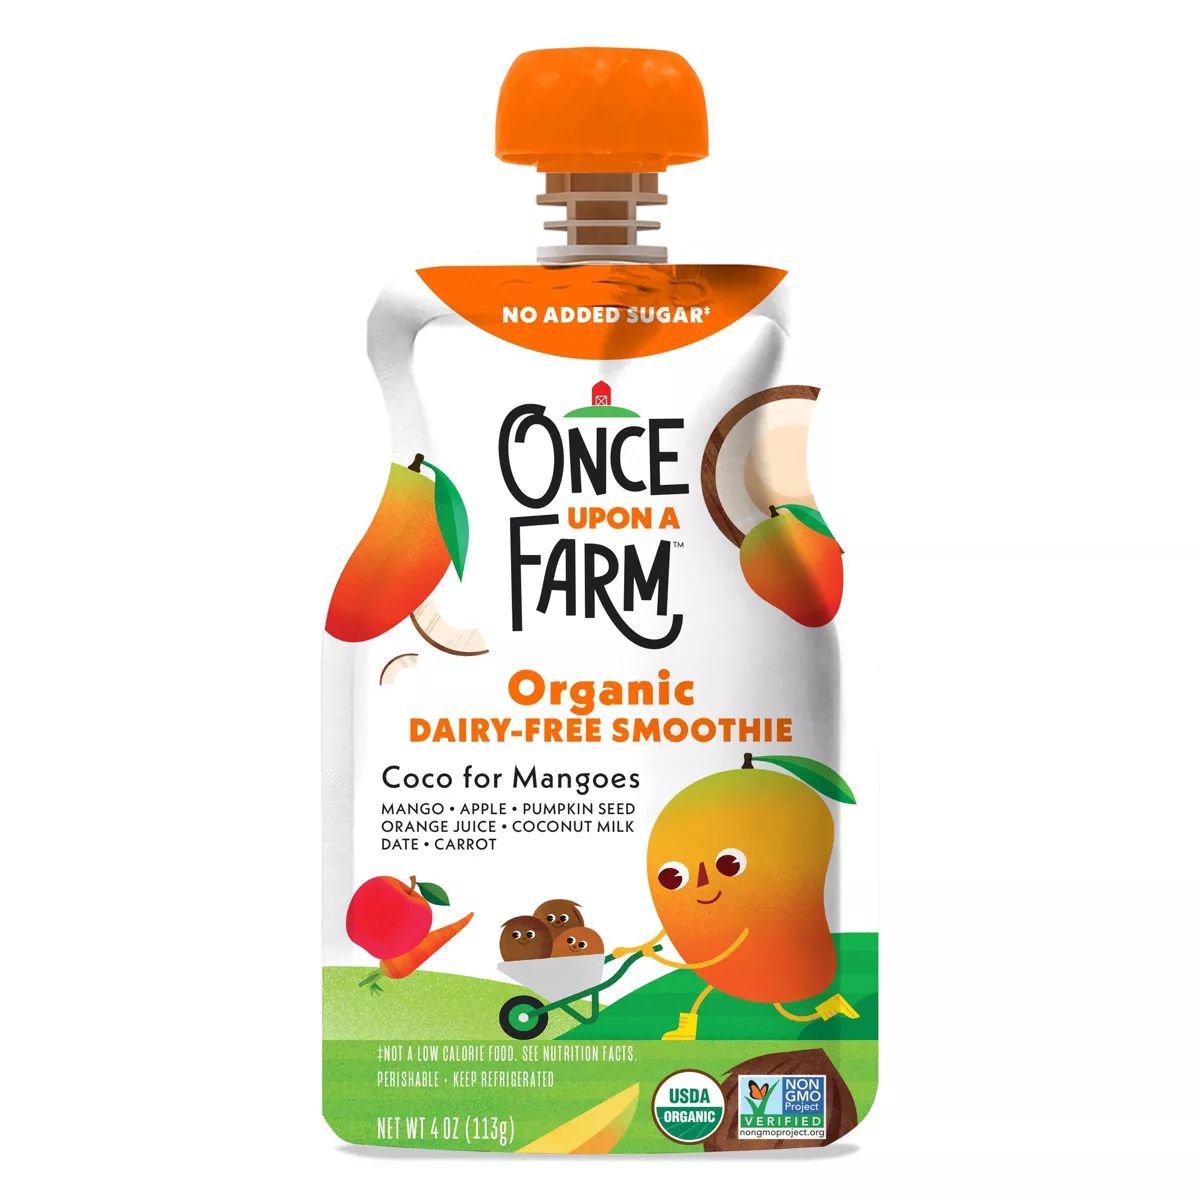 Once Upon a Farm Coco for Mangoes Organic Dairy-Free Kids' Smoothie - 4oz Pouch | Target